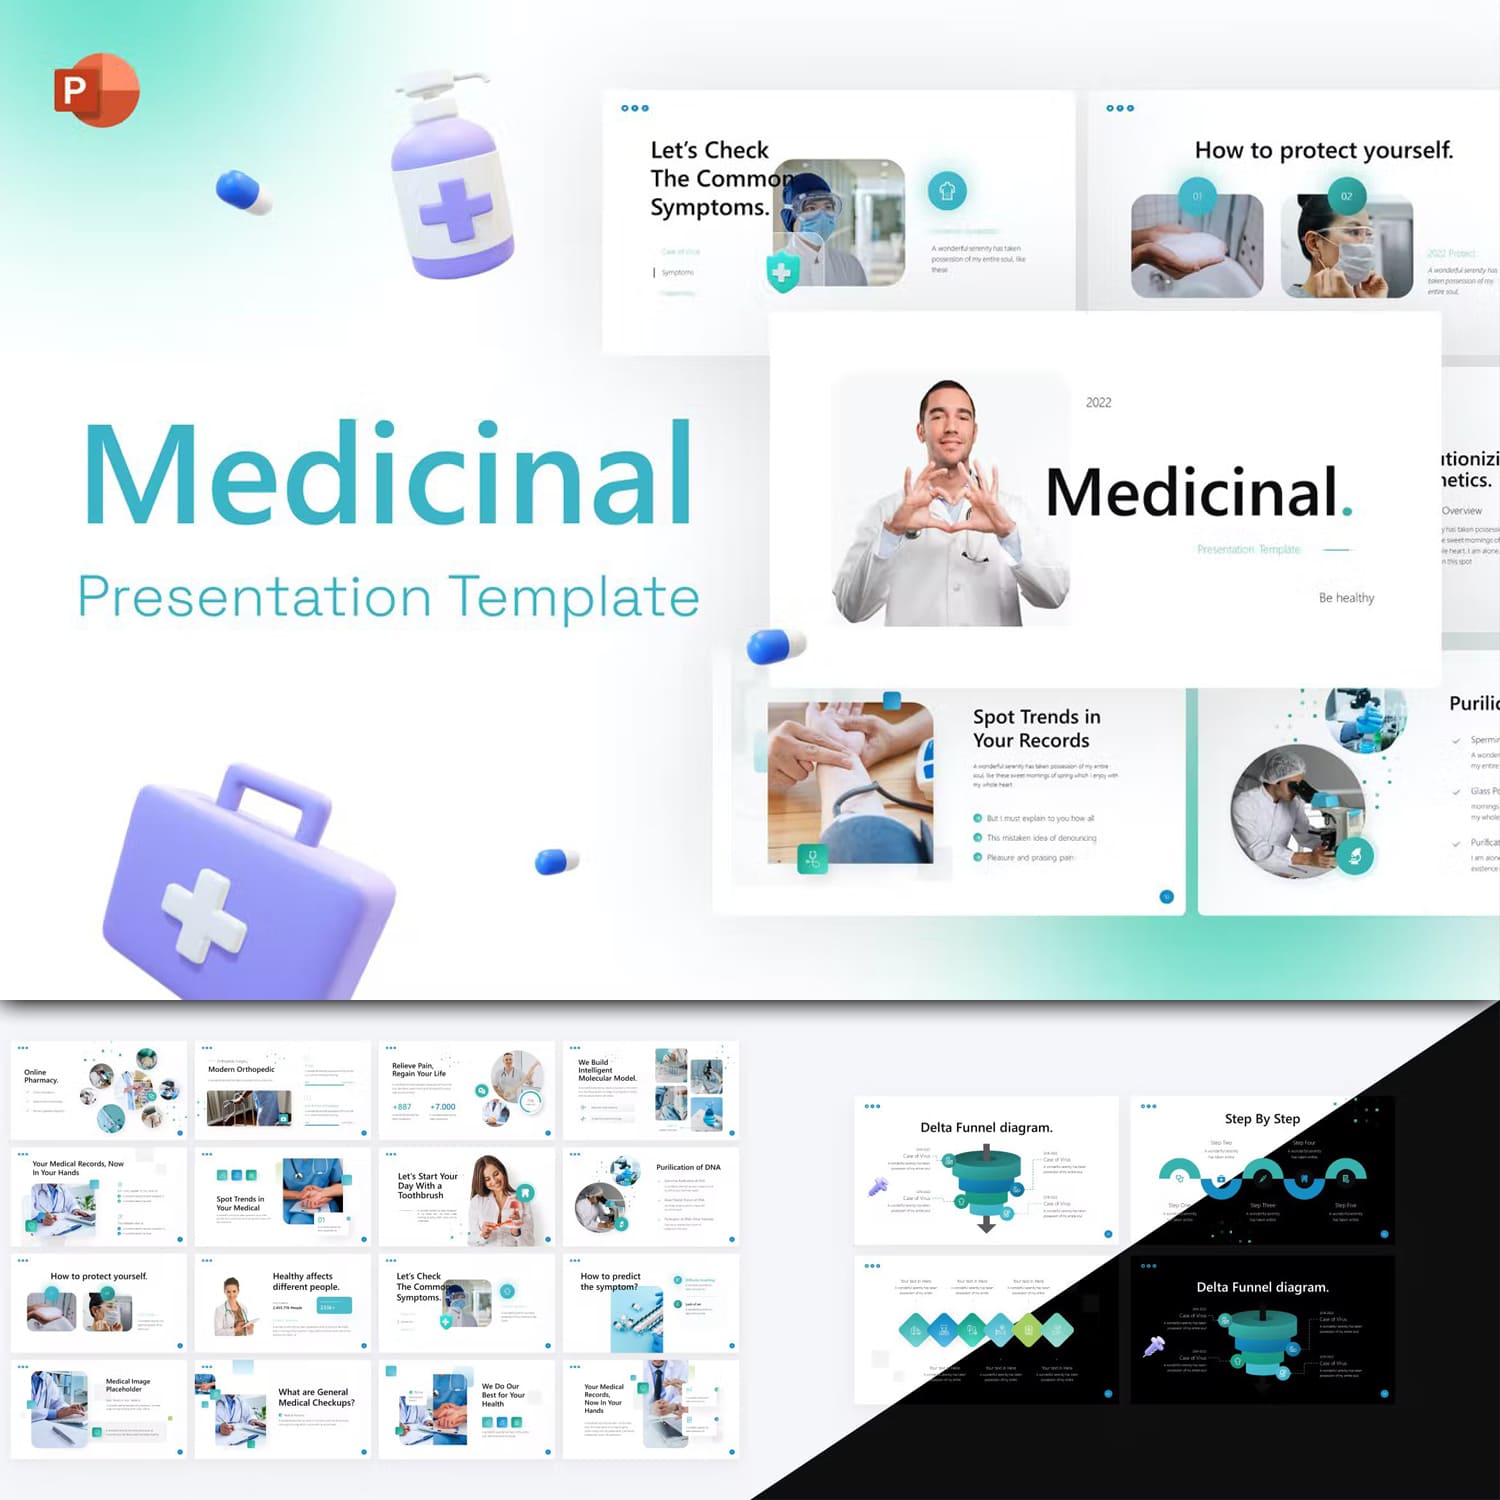 Medicinal 3d illustration powerpoint template - main image preview.